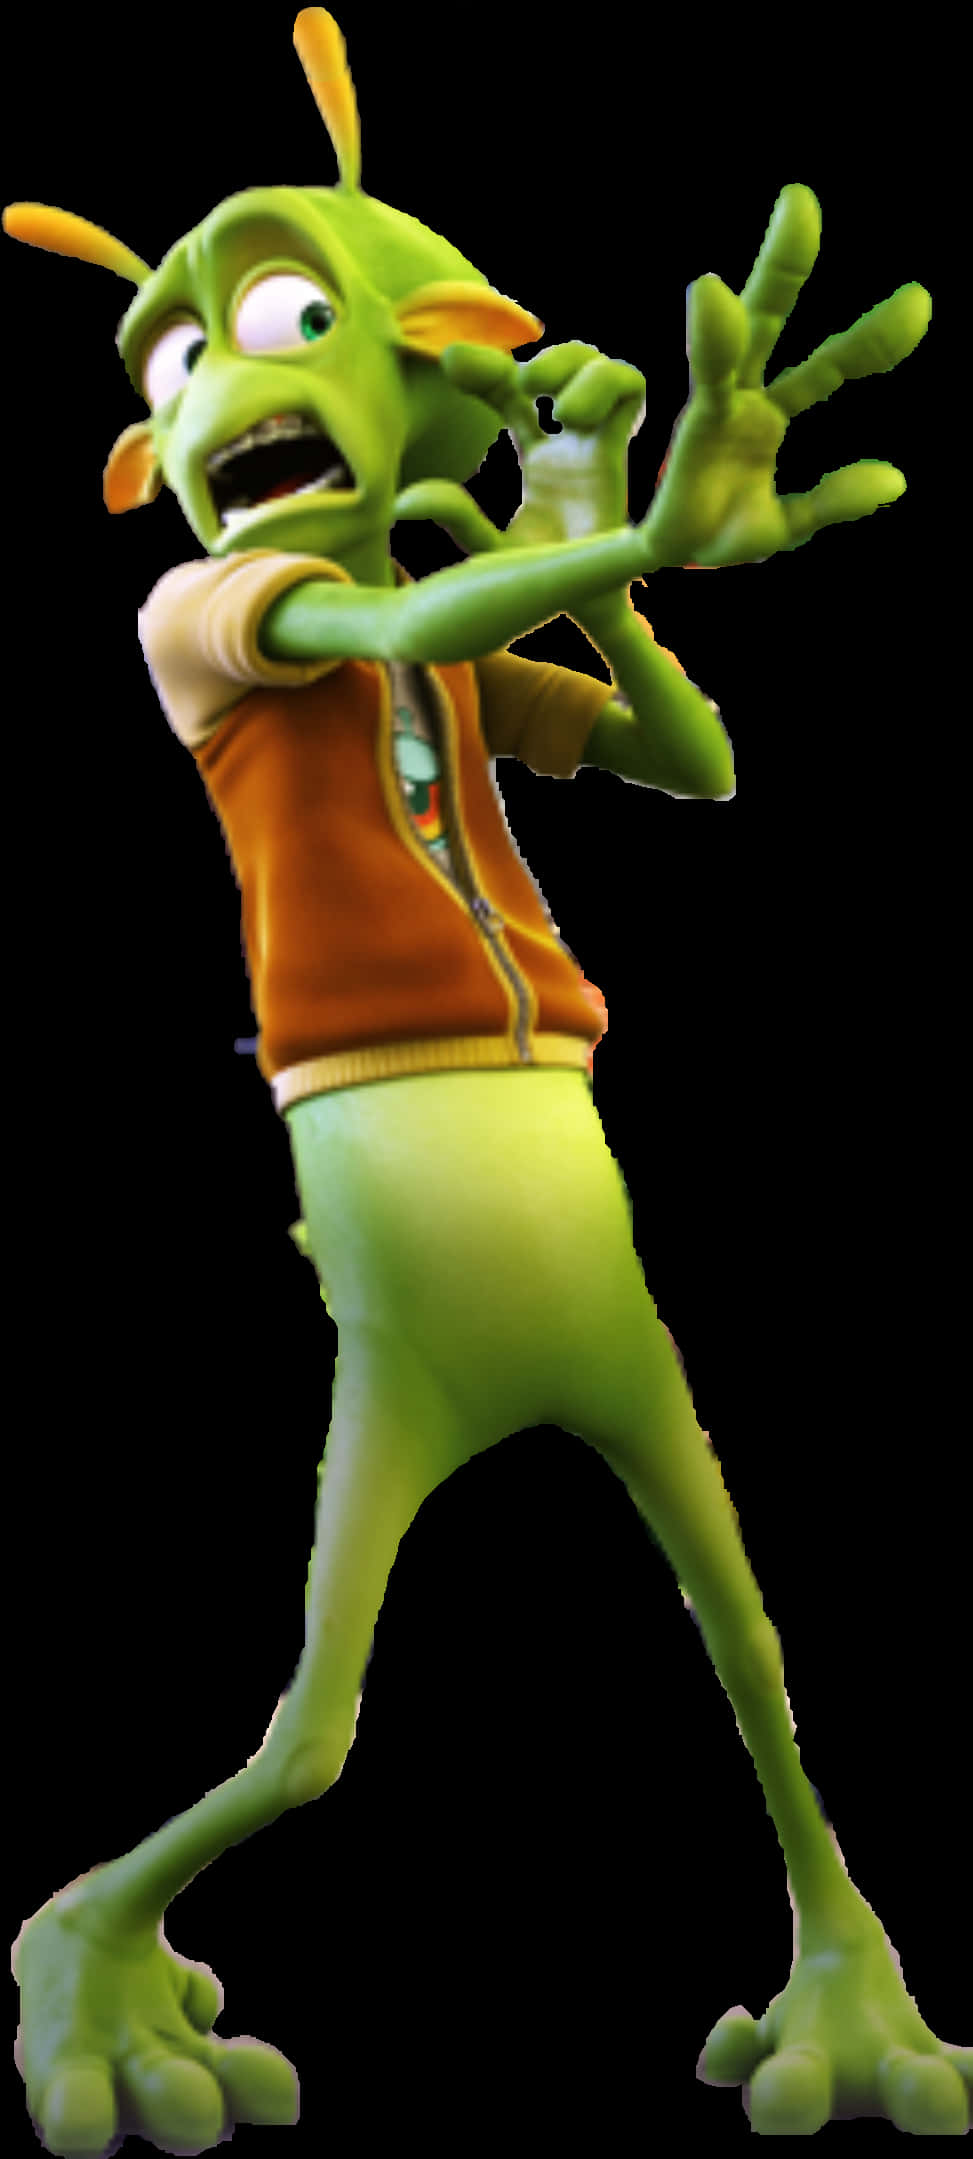 Animated Green Alien Character